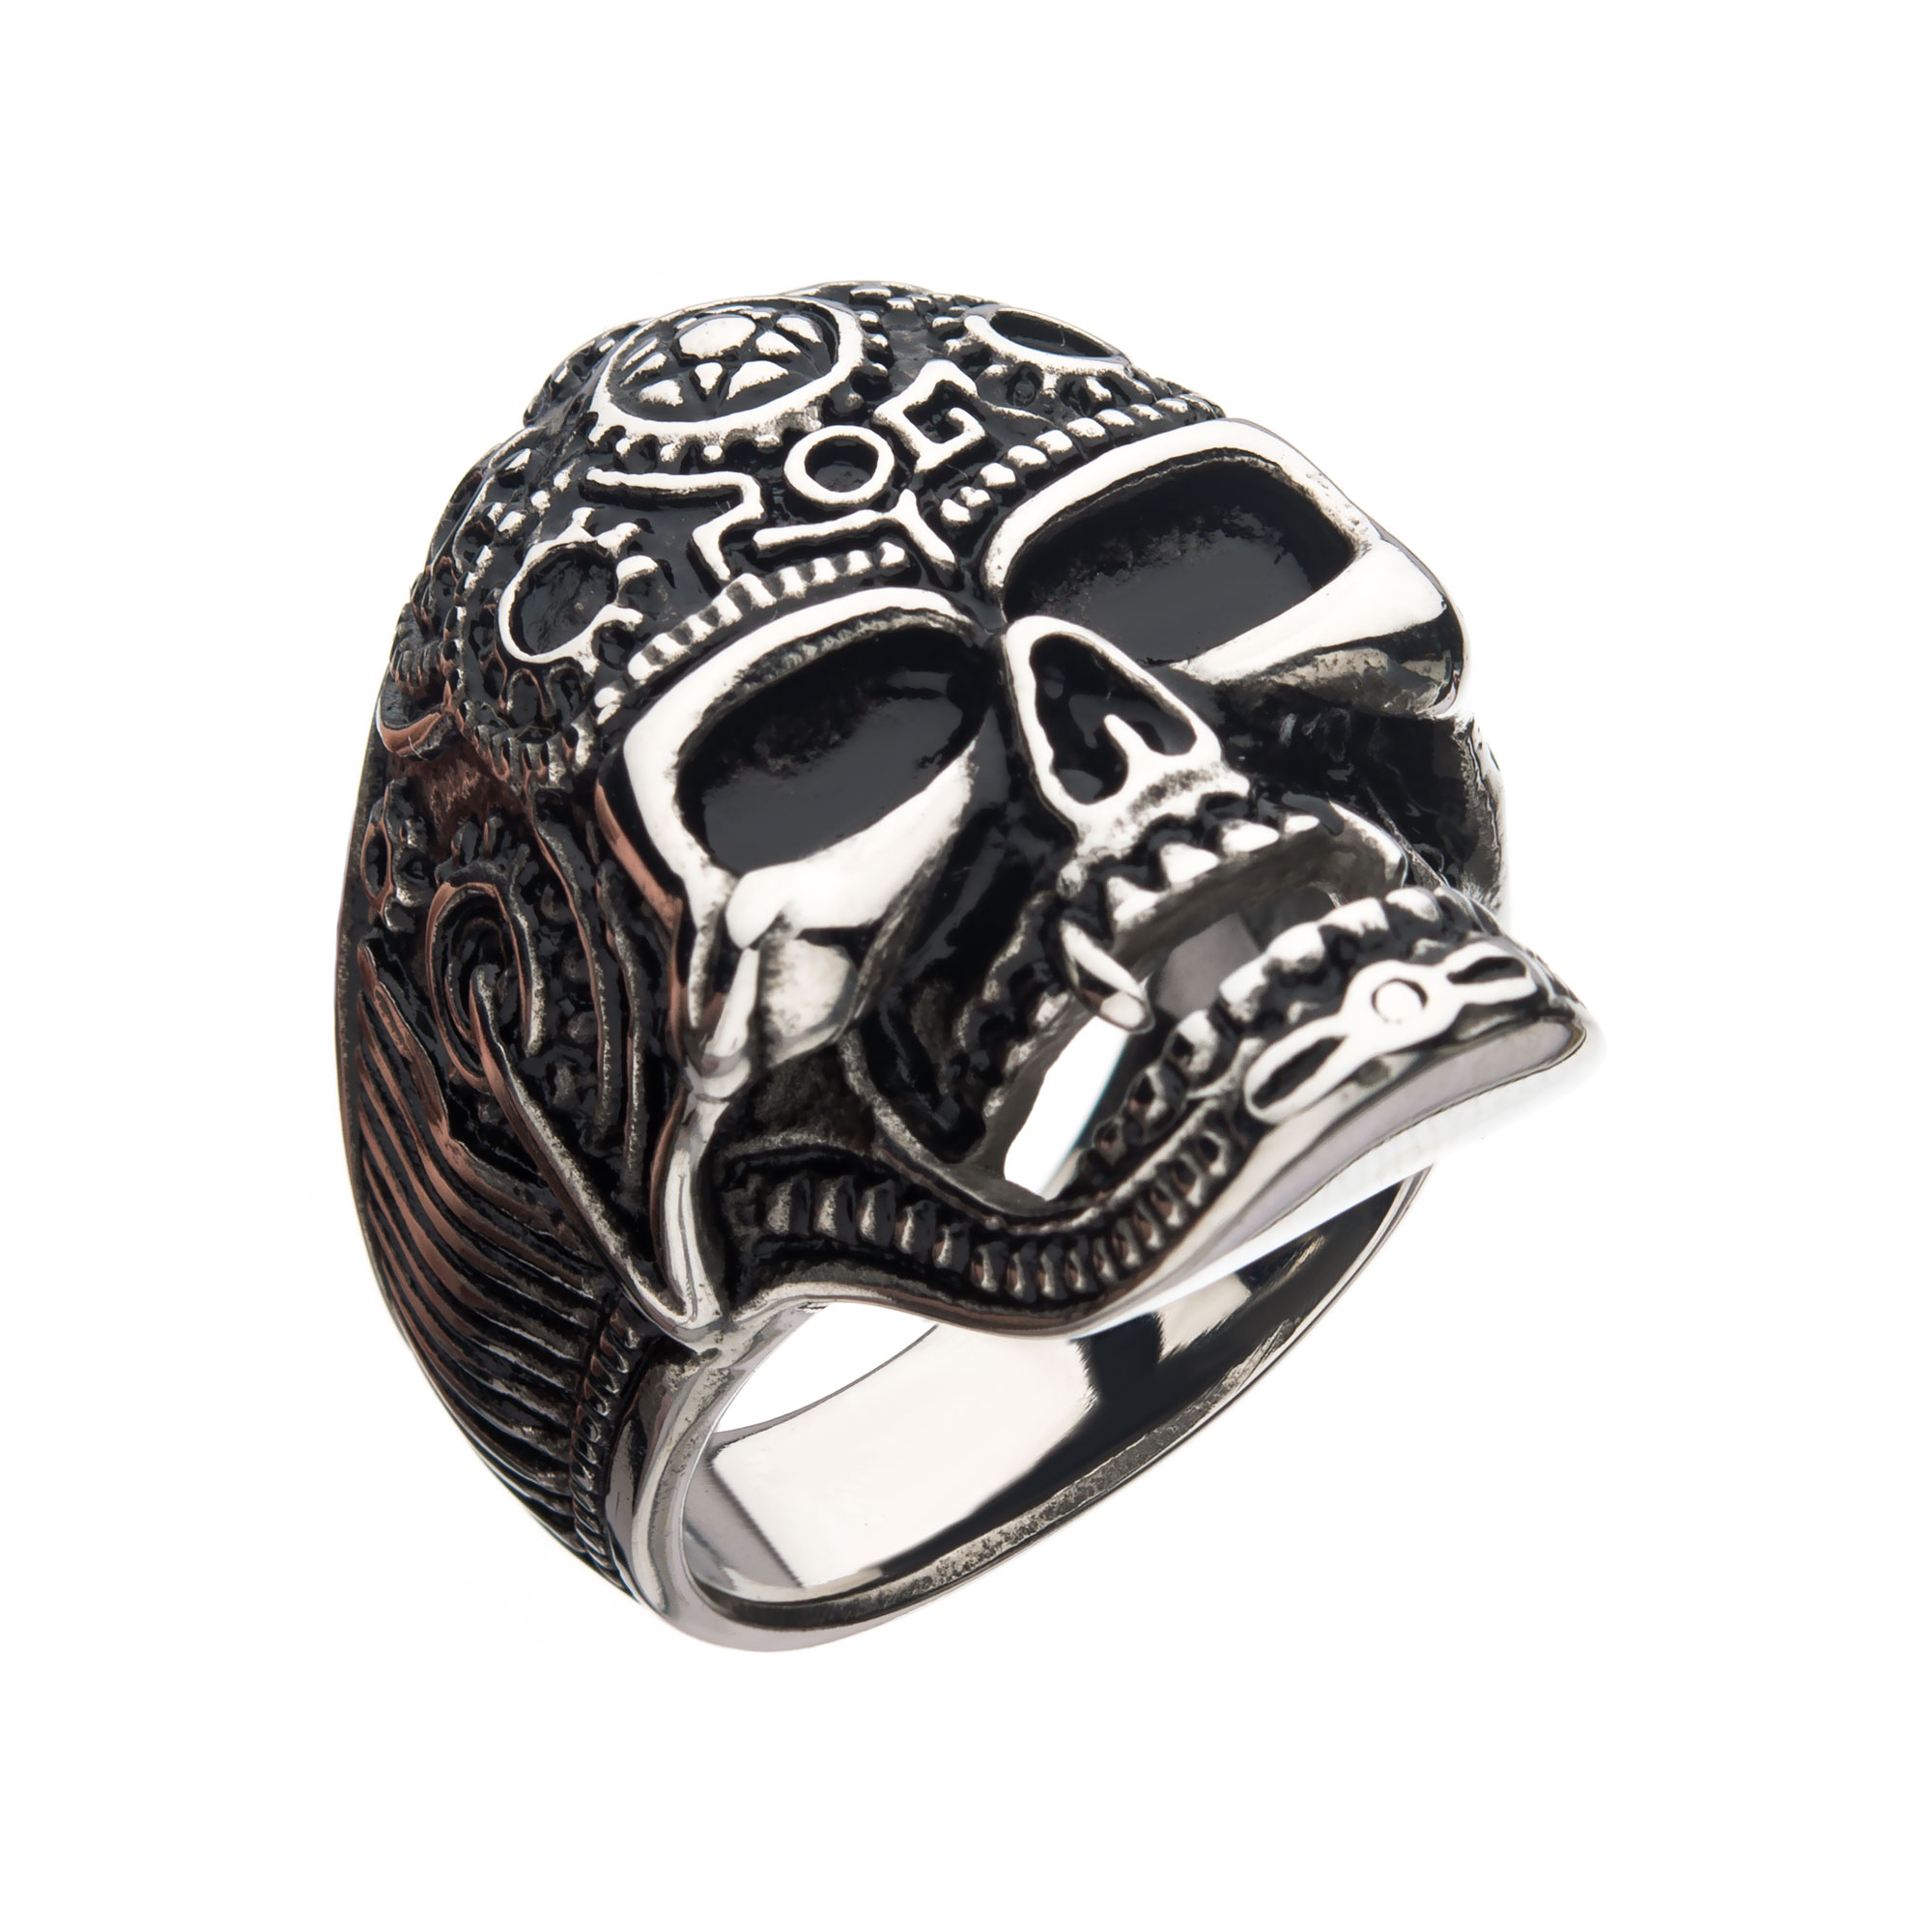 Oxidized Stainless Steel Vampire Skull Ring Thurber's Fine Jewelry Wadsworth, OH